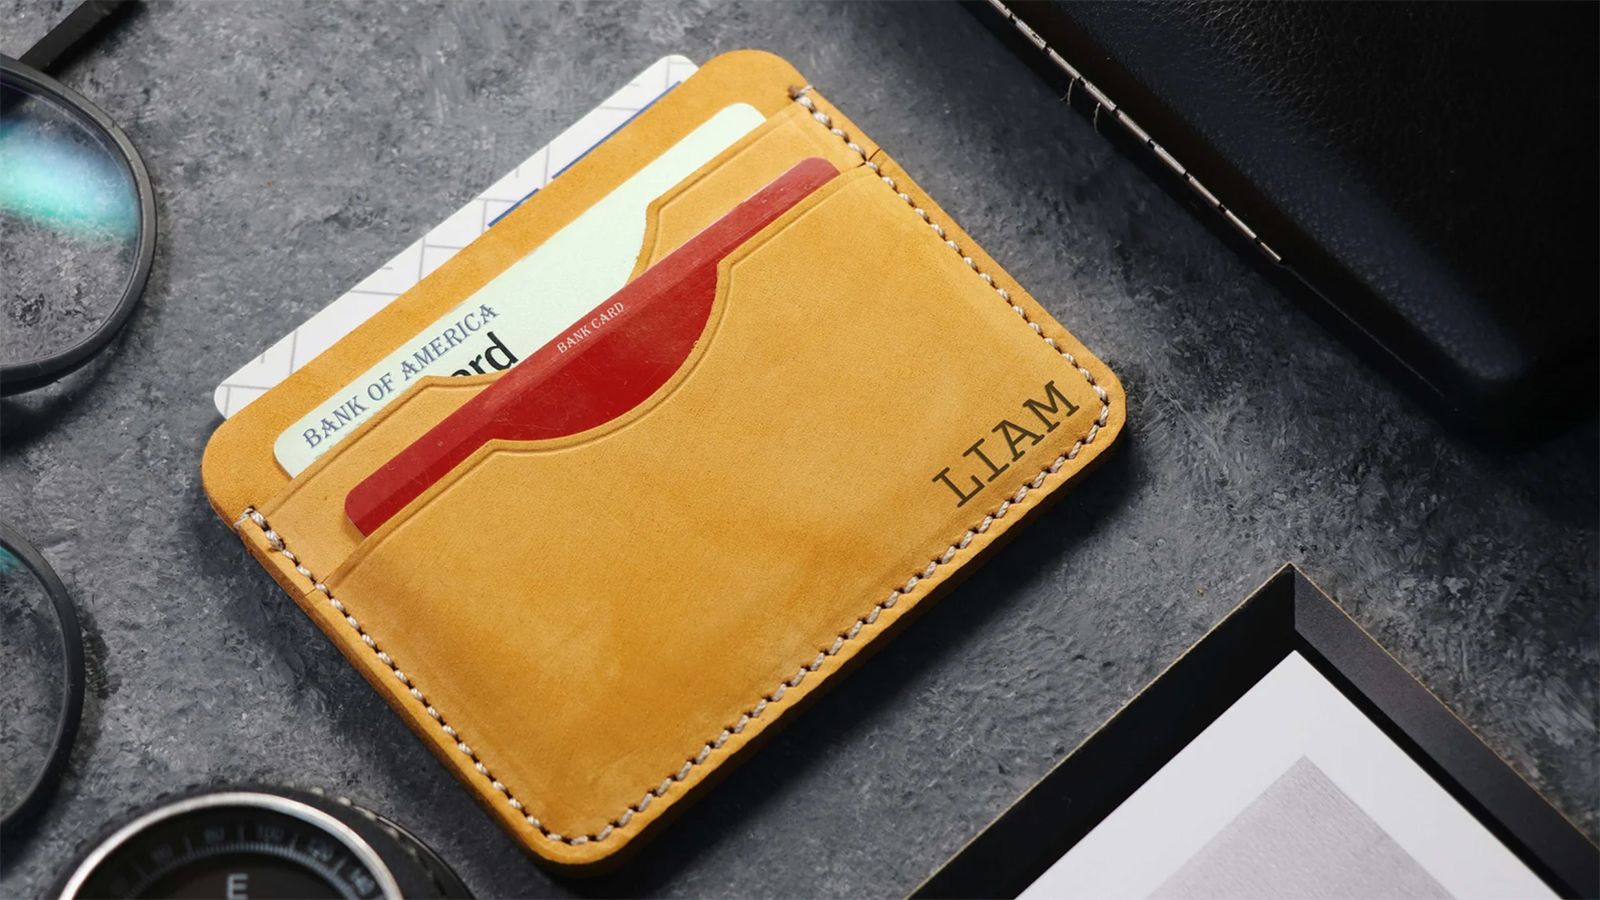 https://media.cnn.com/api/v1/images/stellar/prod/gifts-people-you-don-t-know-southernkickleather-personalized-leather-card-holder.jpg?c=16x9